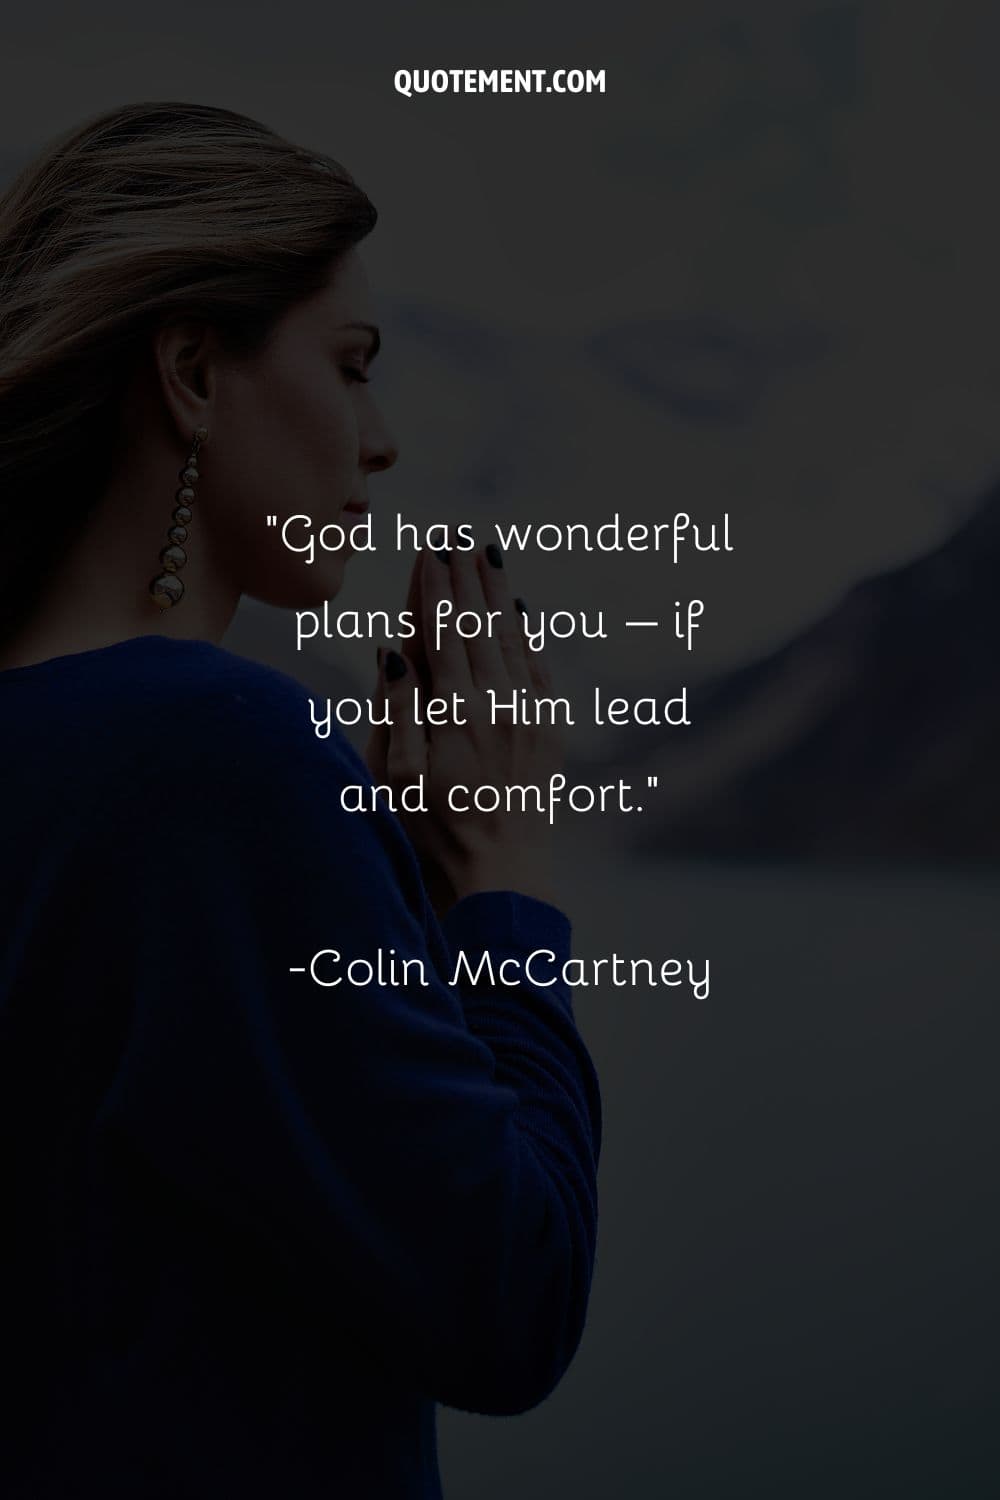 Image of a woman praying with her hand clasped representing God's plan quote.